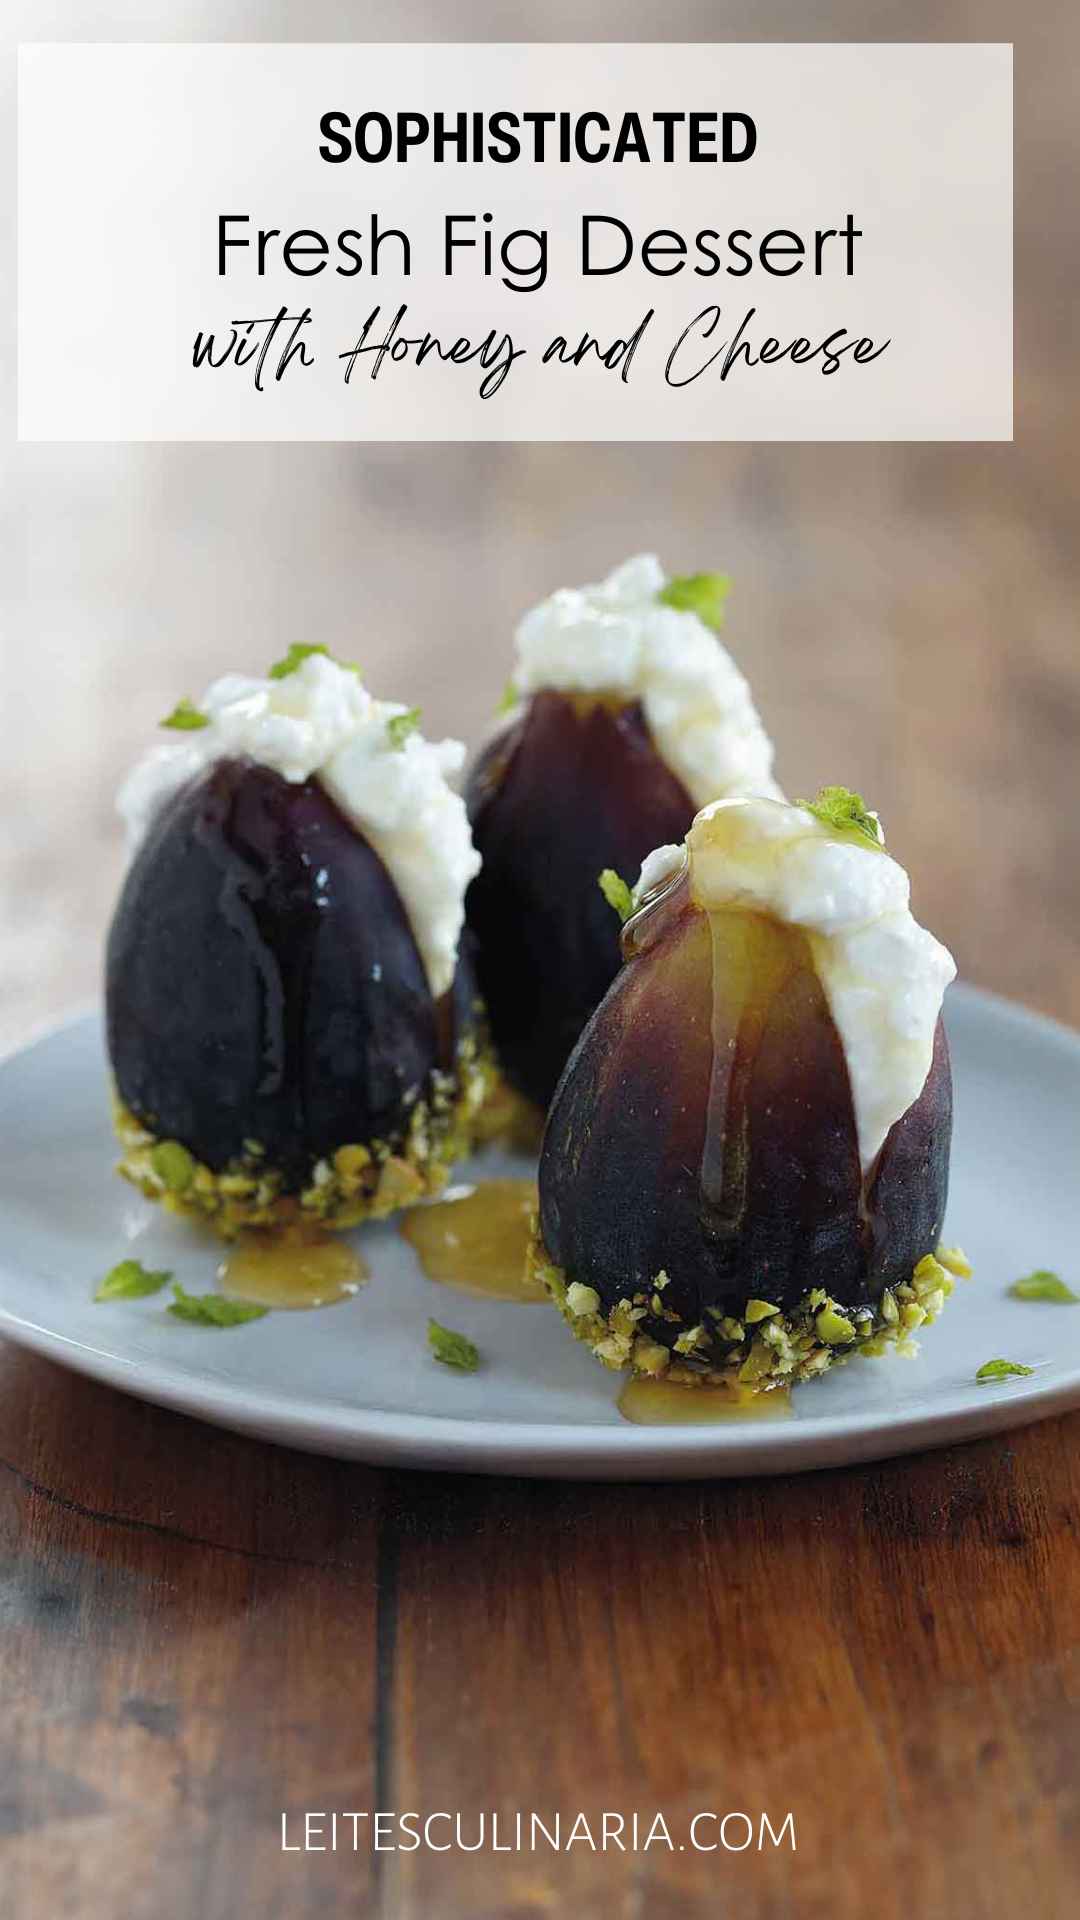 Three figs filled with ricotta cheese and topped with honey on a plate.